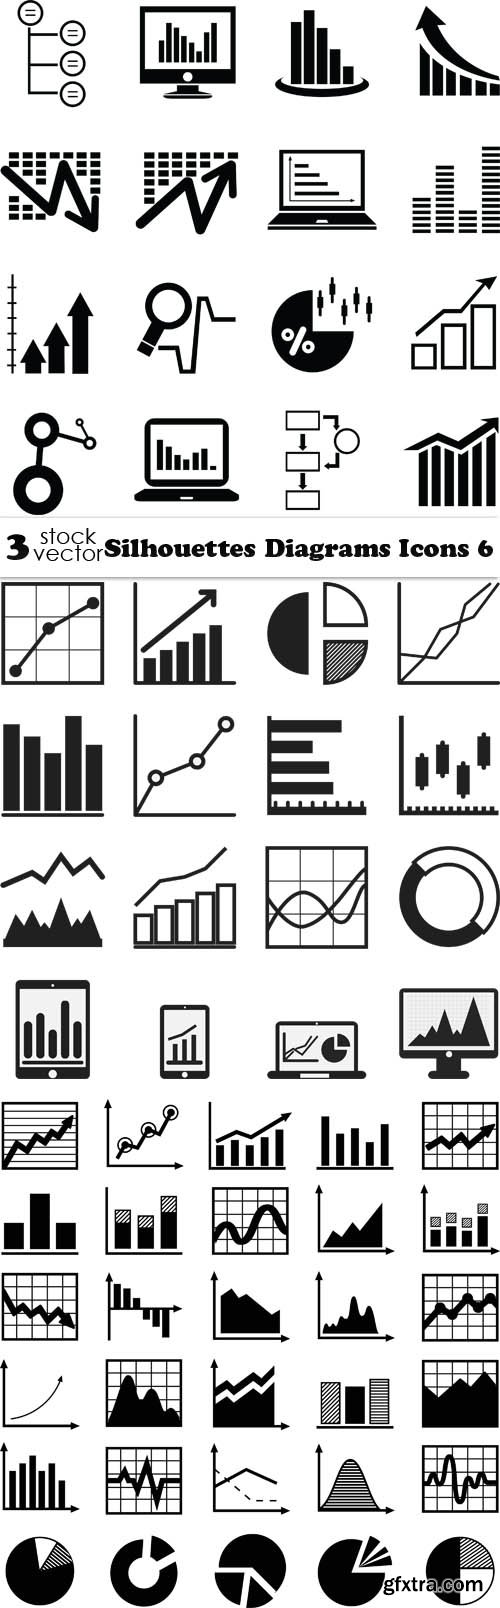 Vectors - Silhouettes Diagrams Icons 6